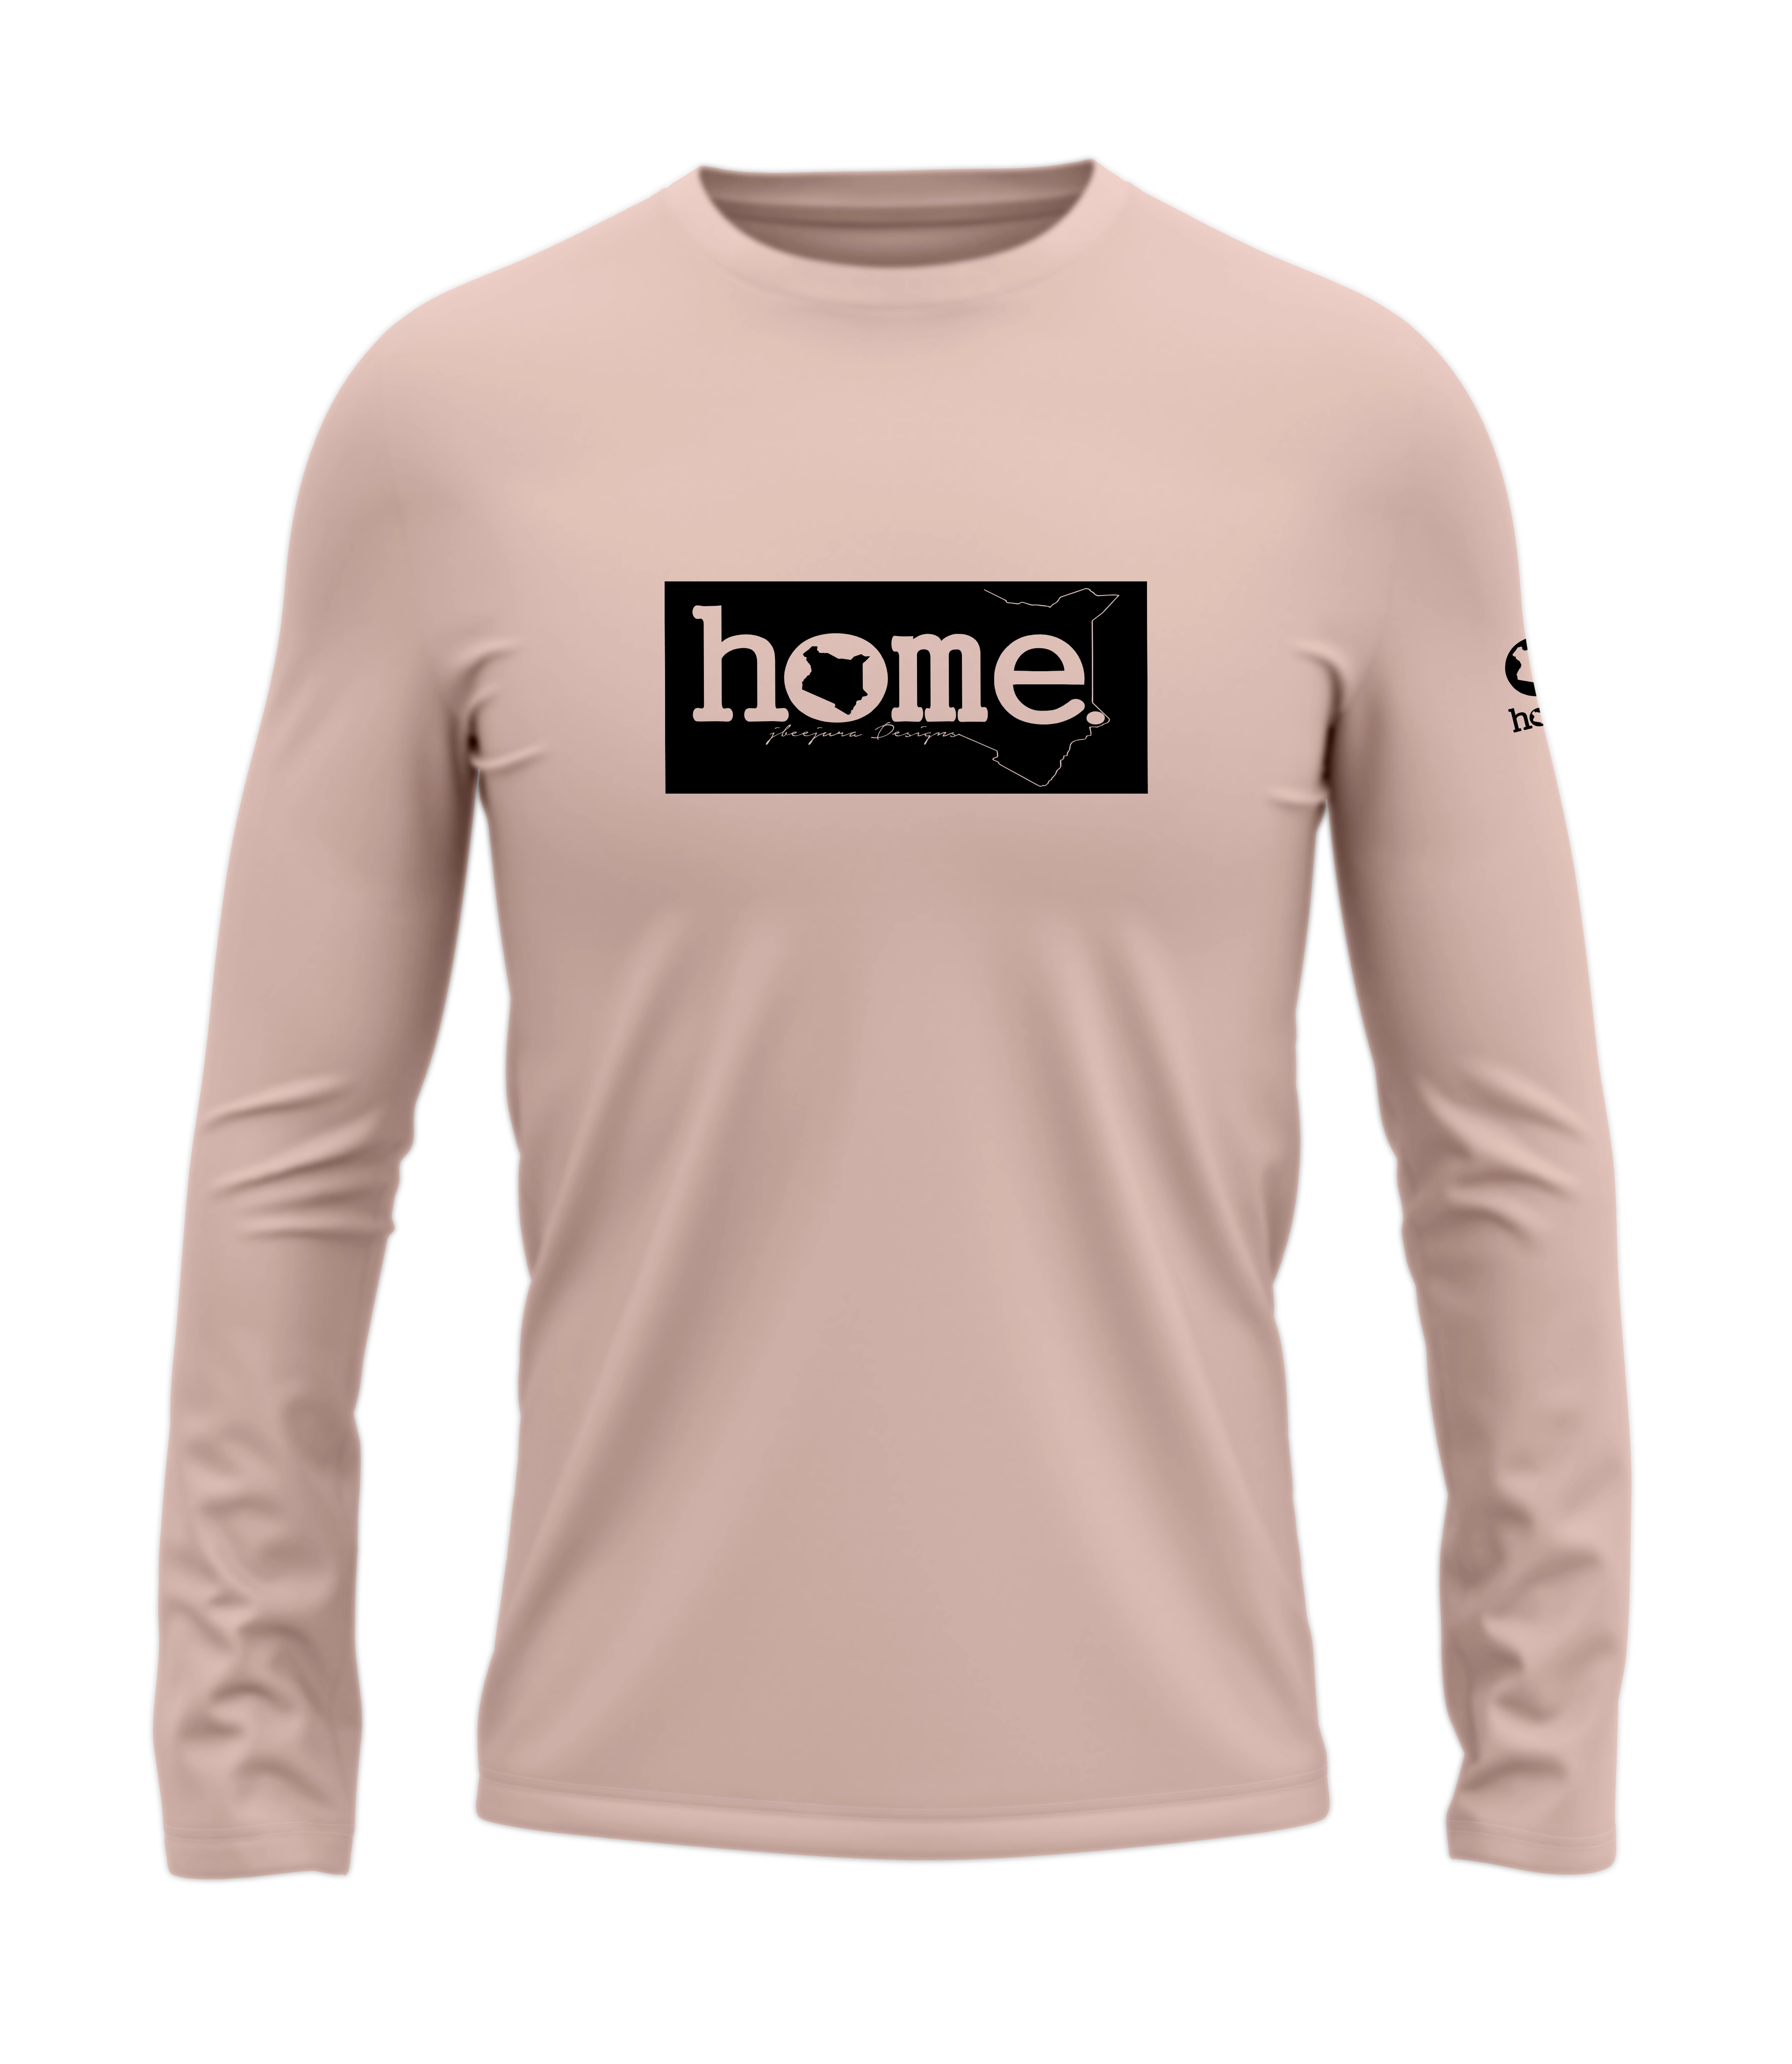 home_254 LONG-SLEEVED PEACH T-SHIRT WITH A BLACK CLASSIC PRINT – COTTON PLUS FABRIC